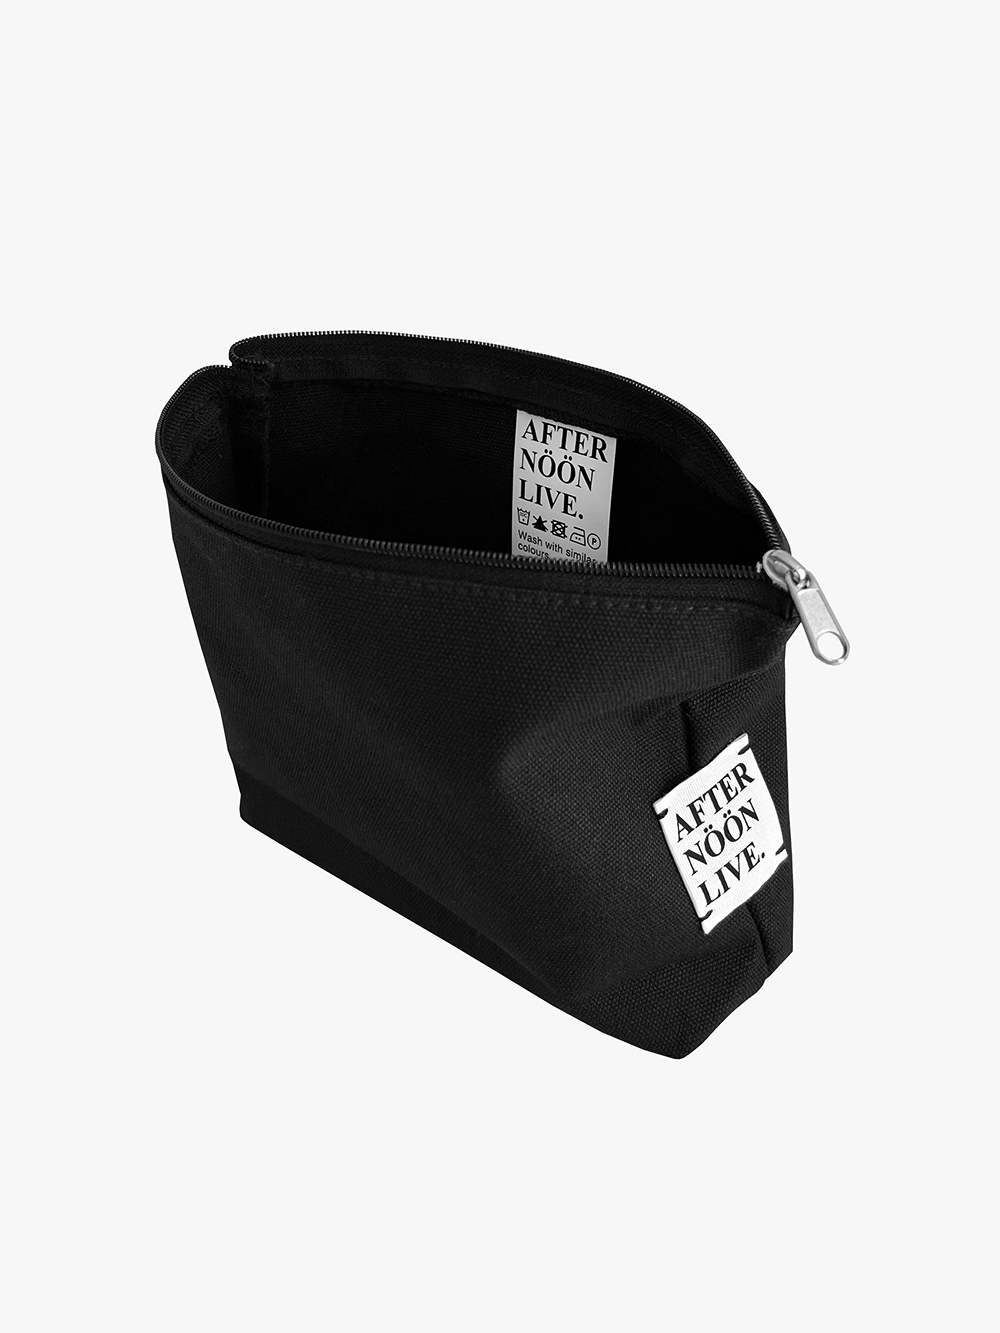 Afternoonlive basic pouch (Black)